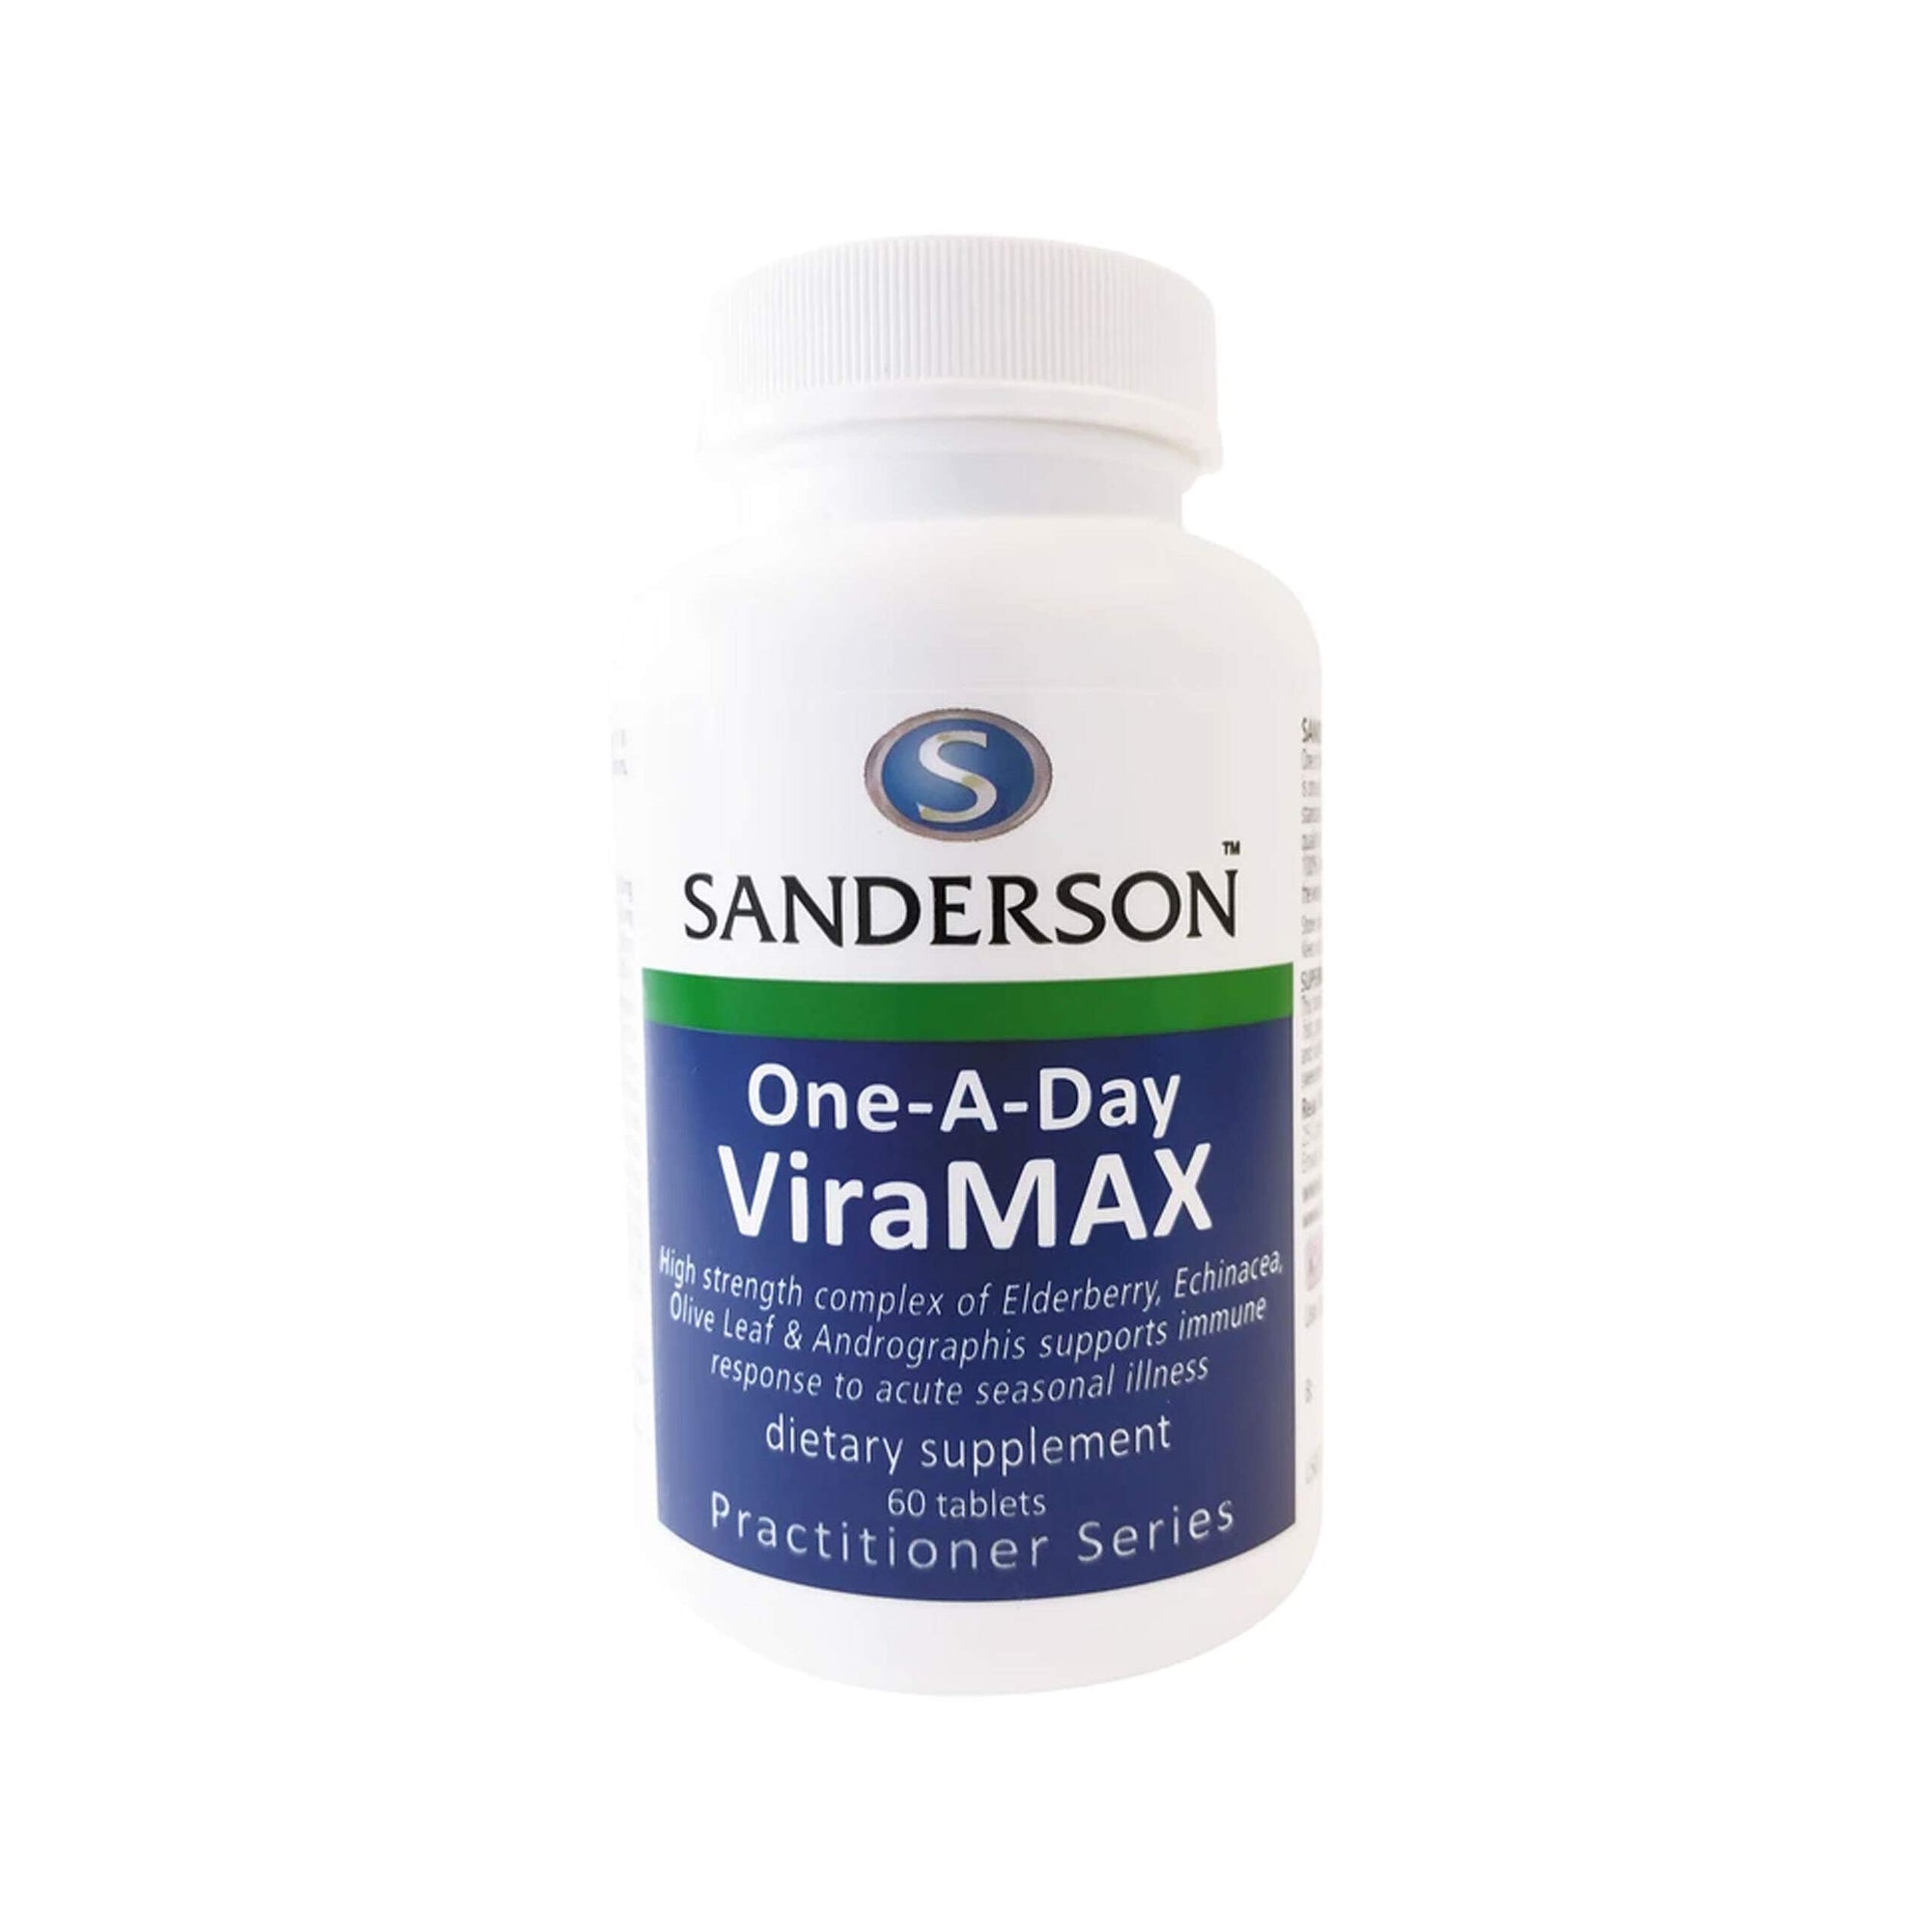 Sanderson One A Day Viramax - 60 tabs